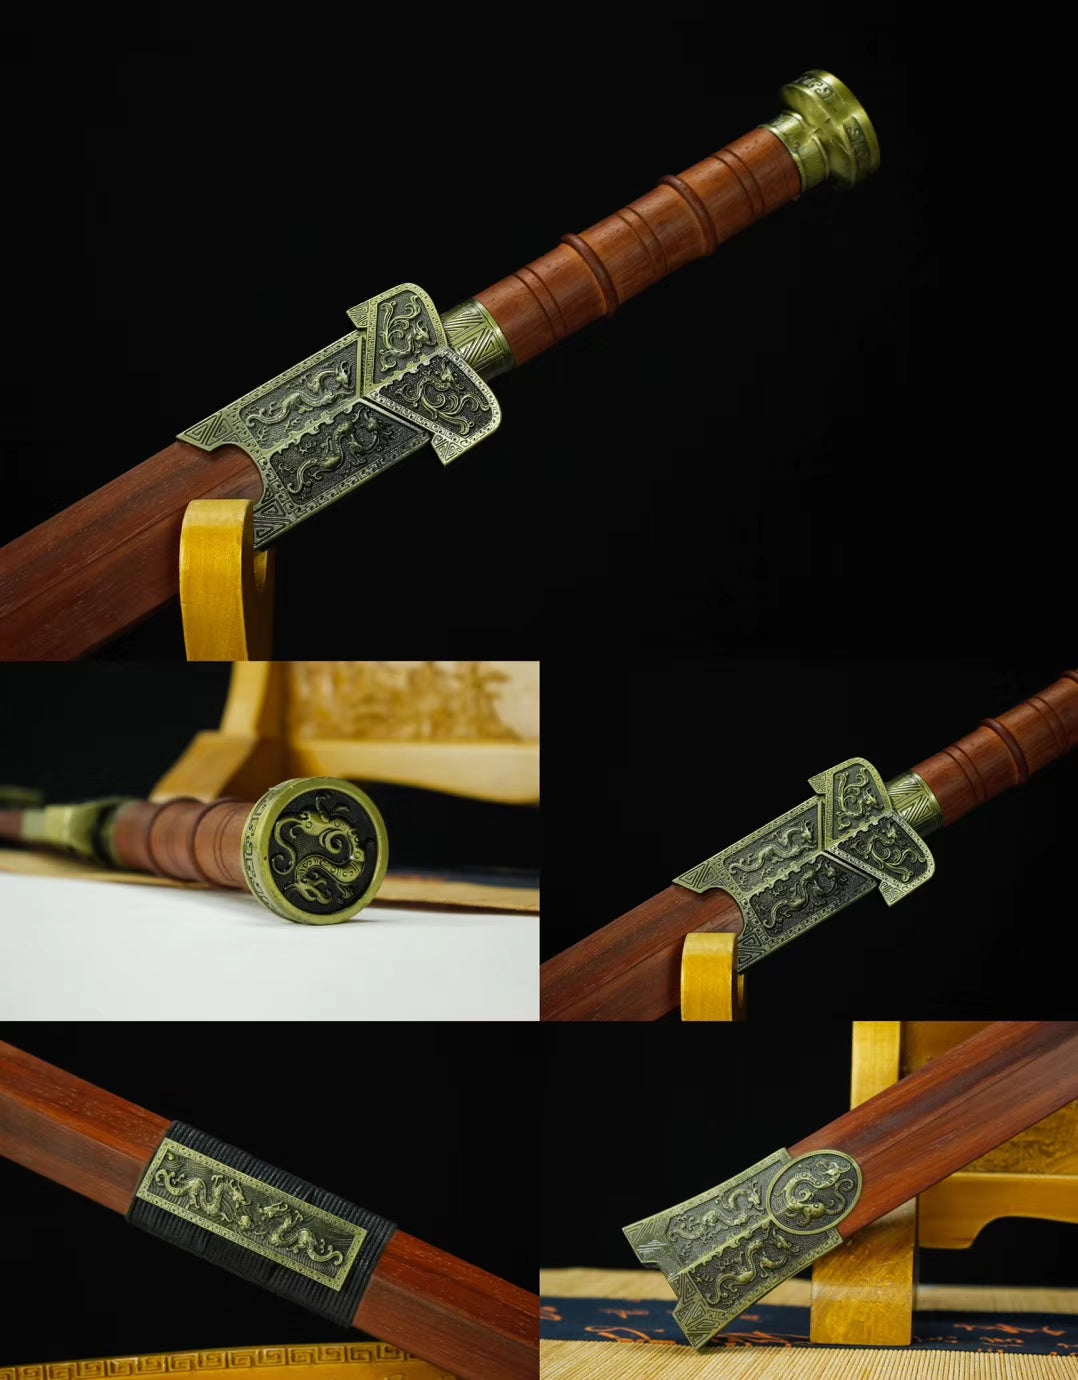 Han sword,High carbon steel blade,Redwood scabbard,Alloy - Chinese sword shop